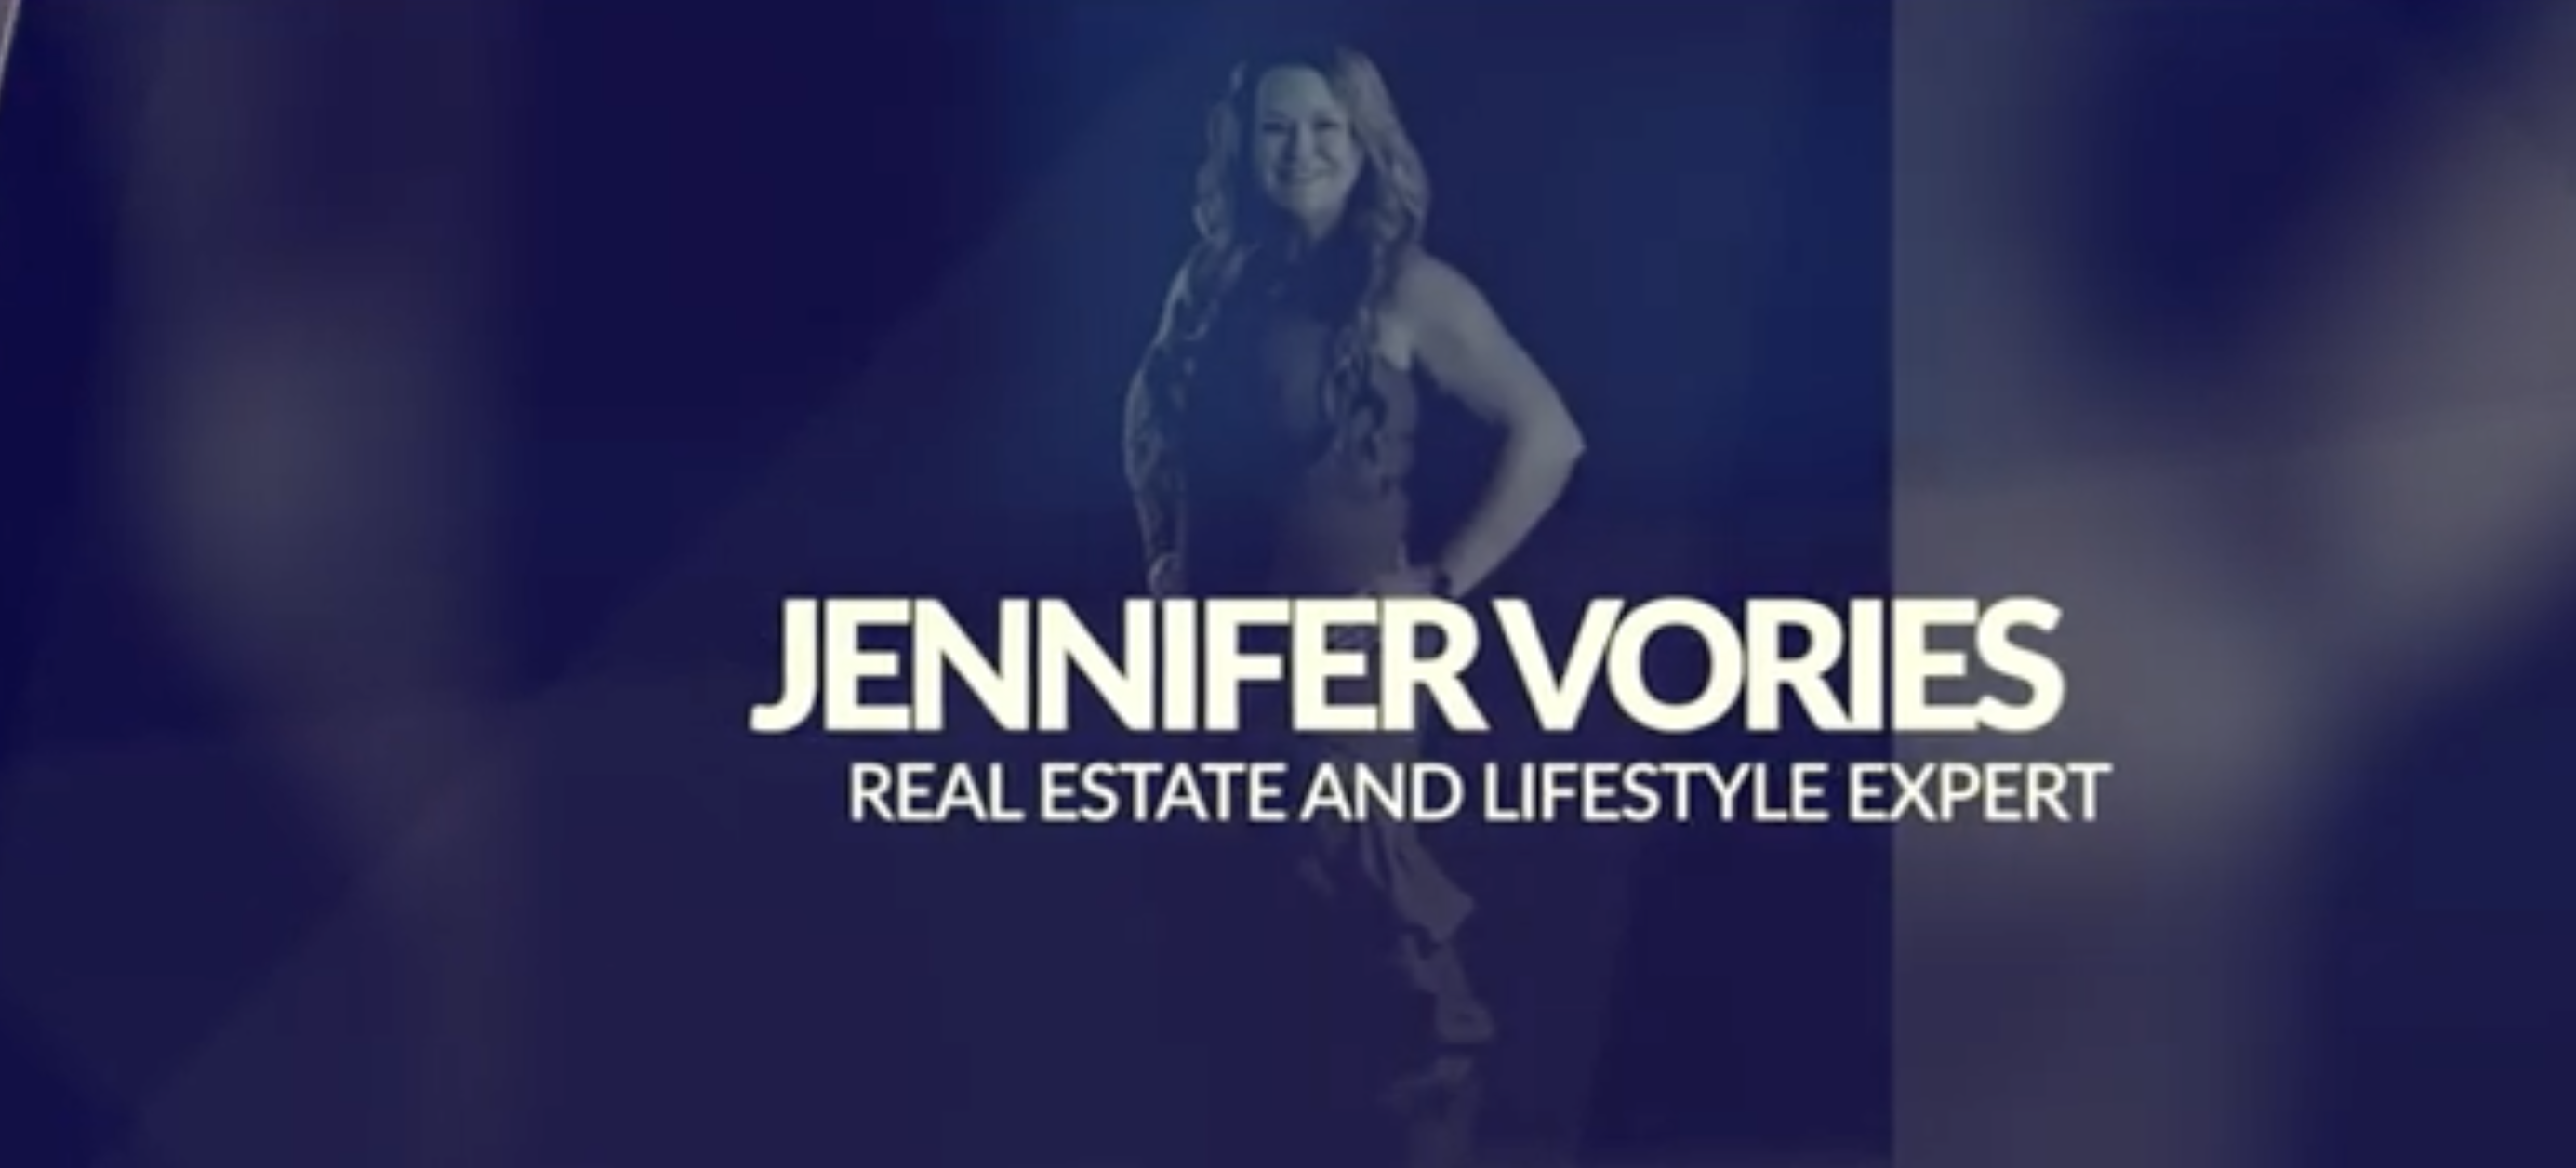 Jennifer is Going to be on T.V.!